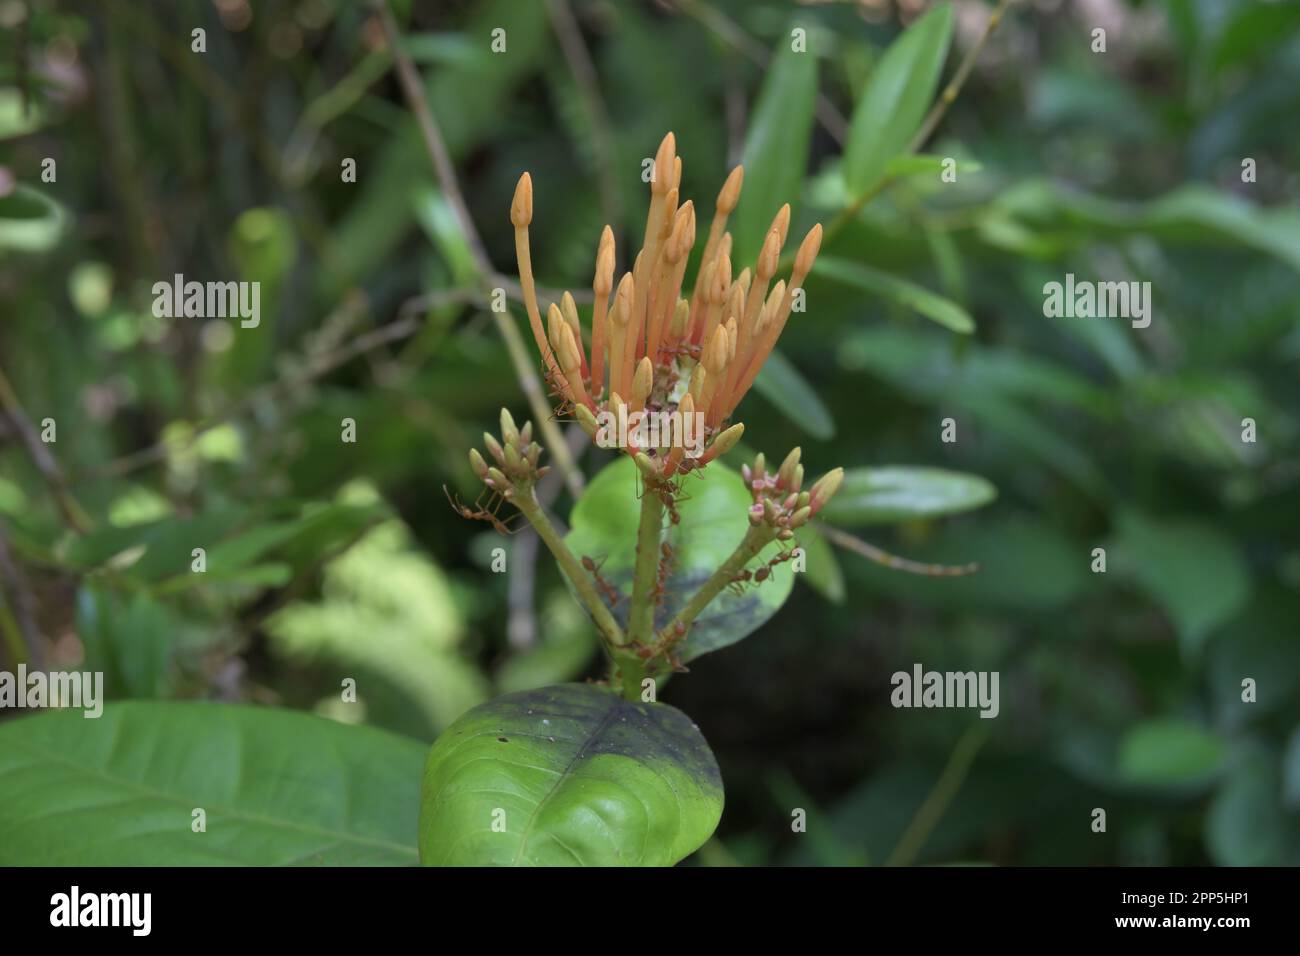 A ready to bloom flower buds of a yellow Ixora (Ixora Coccinea) plant with few weaver ants walking on the flower buds Stock Photo